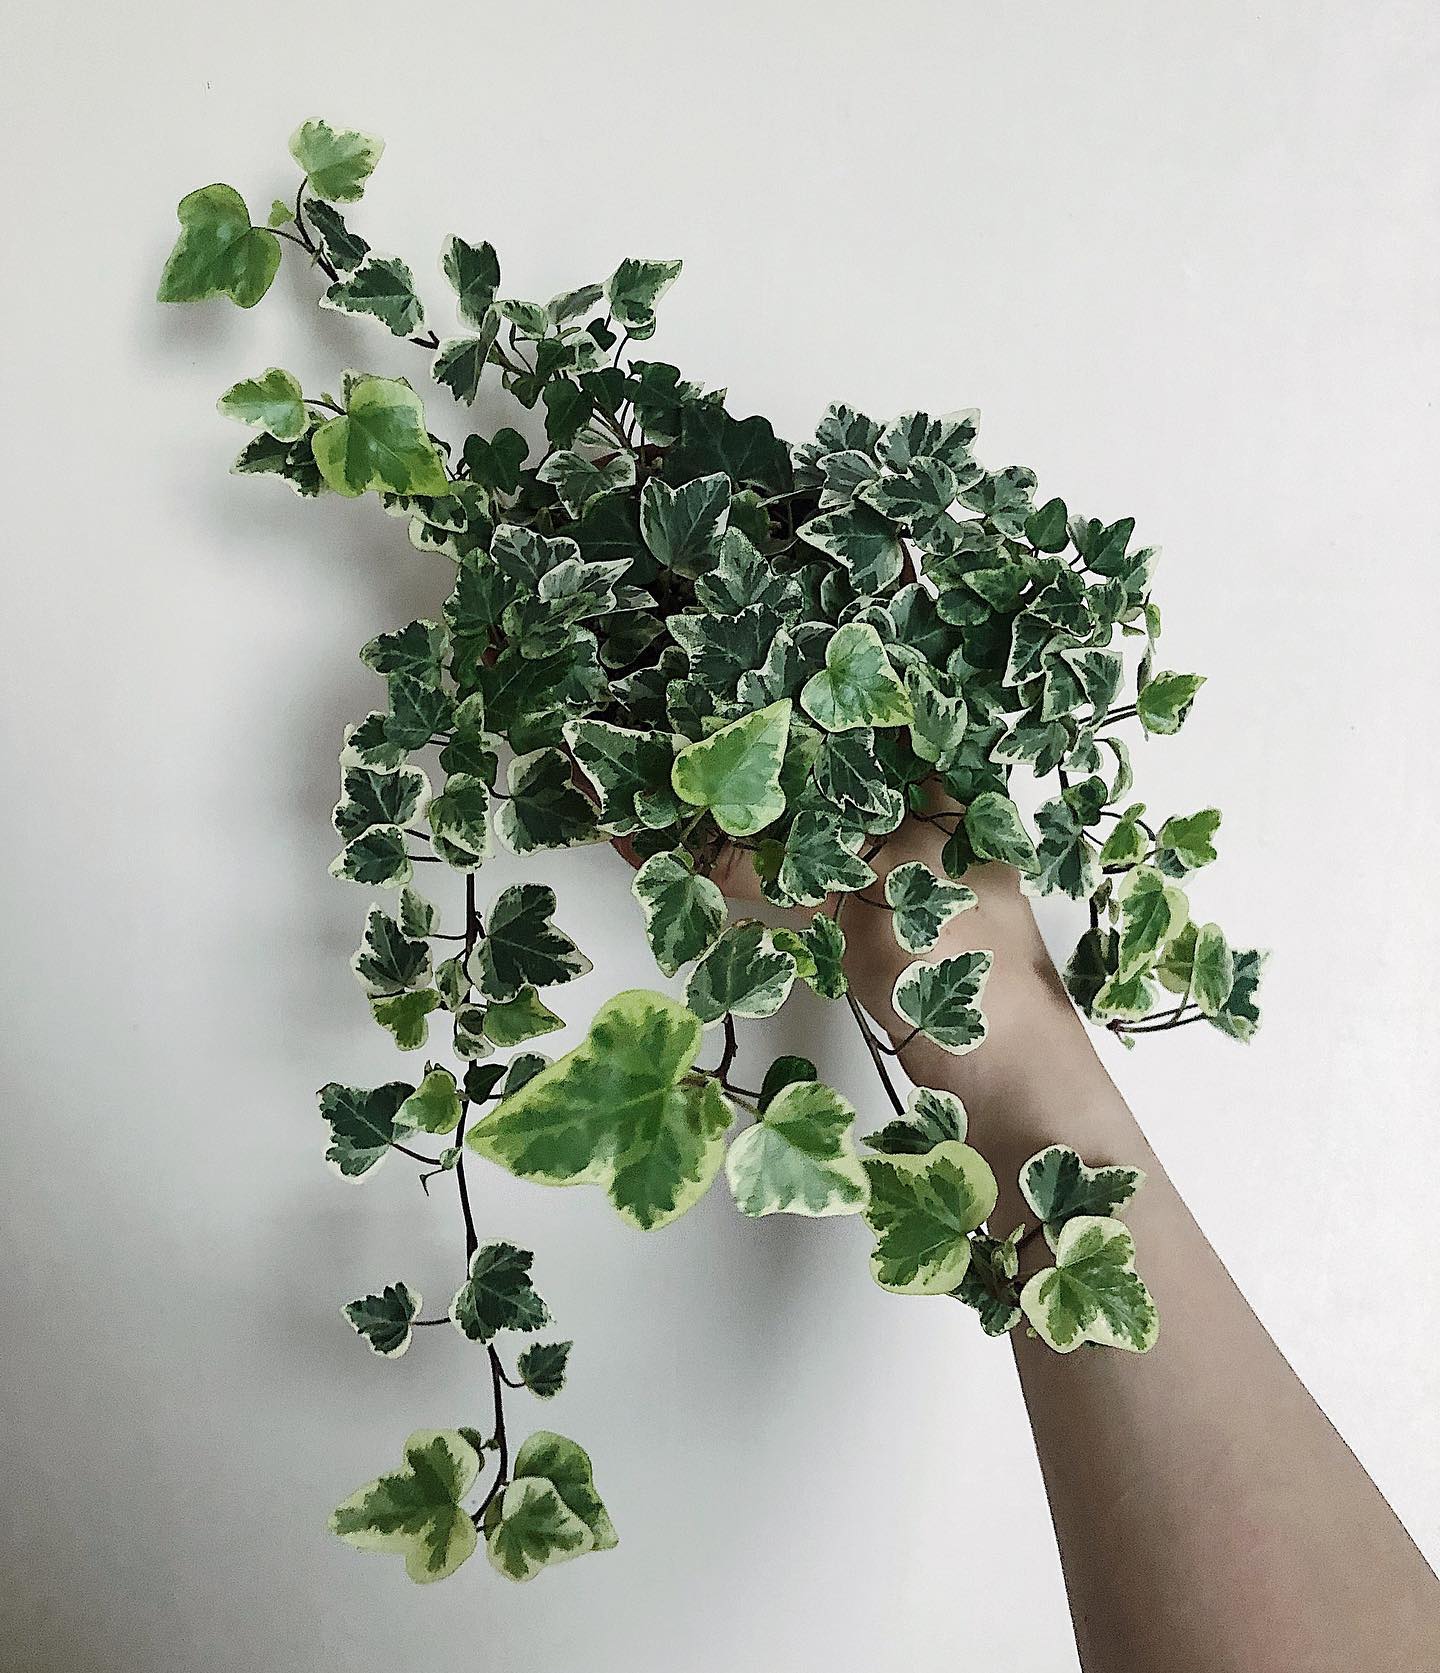 English Ivy (Hedera Helix) - Air-purifying plants on Thursd